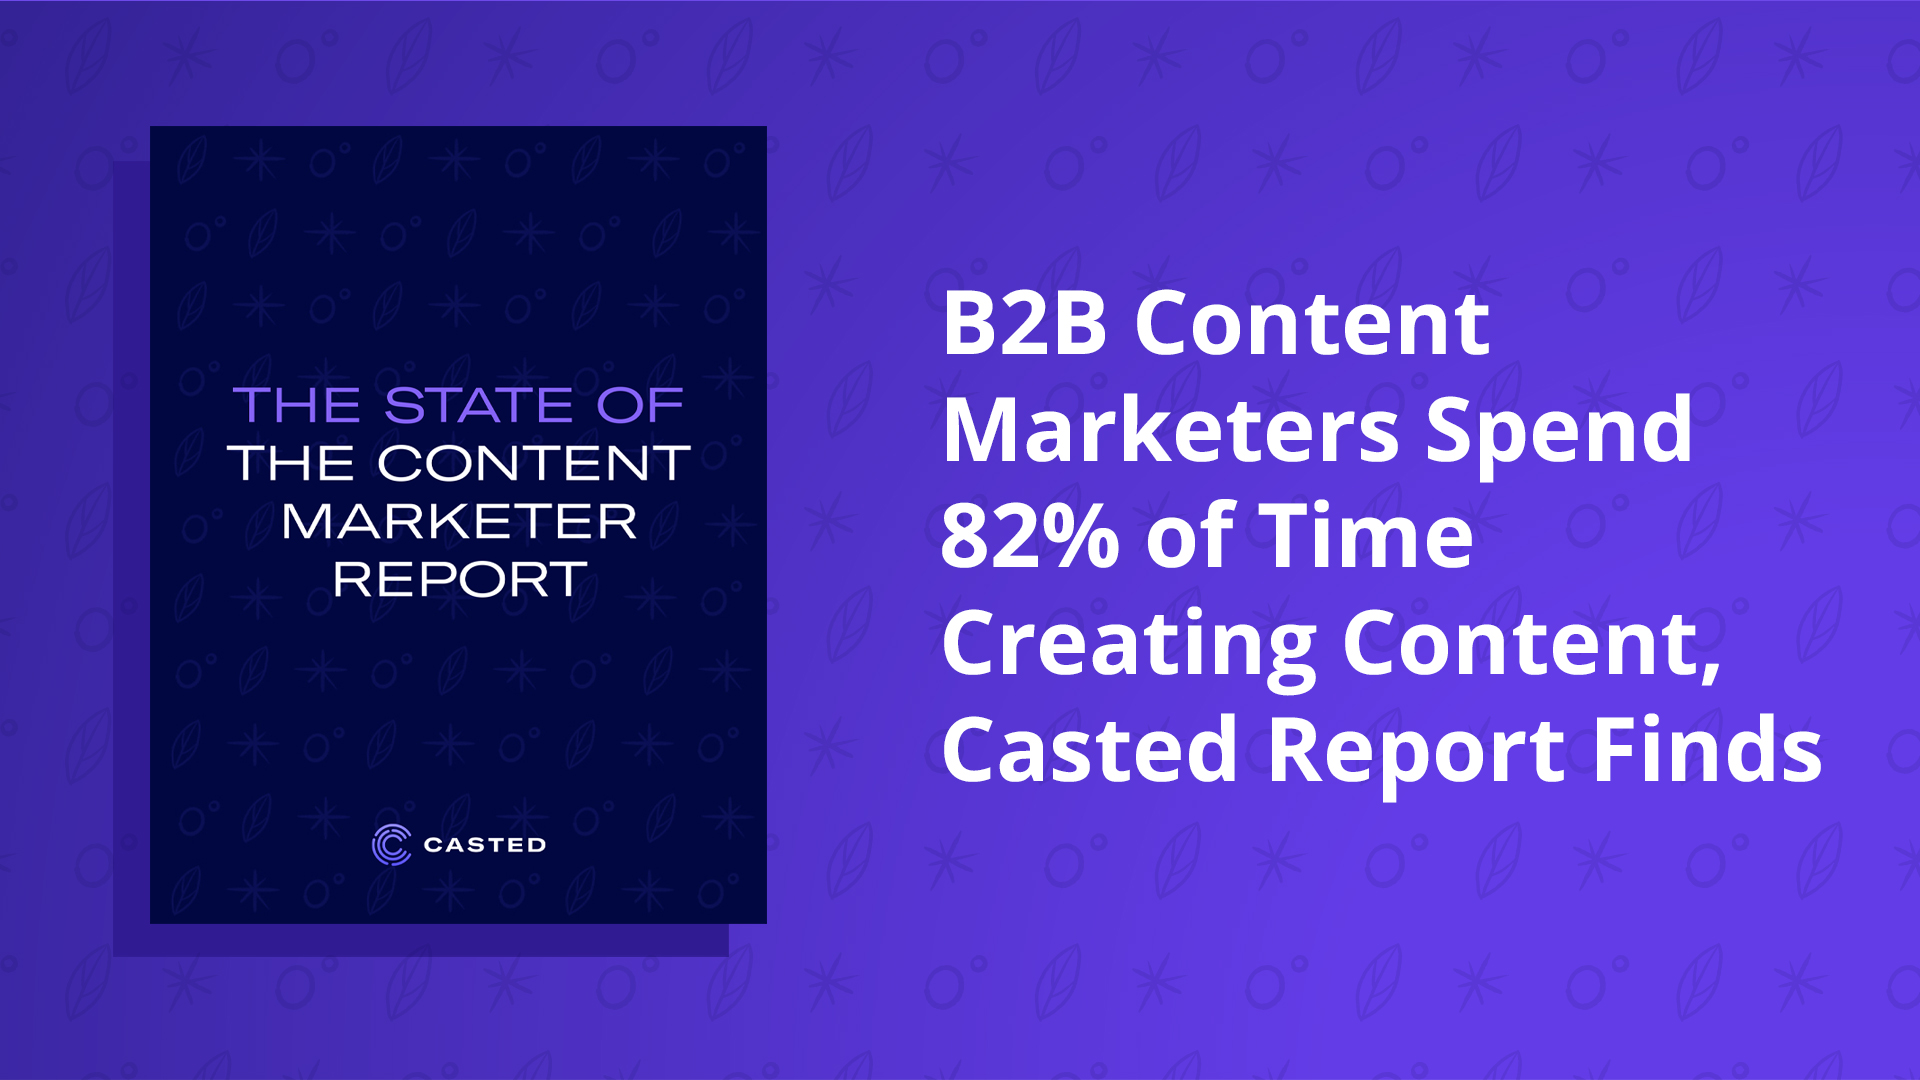 B2B Content Marketers Spend 82% of Time Creating Content, Casted Report Finds